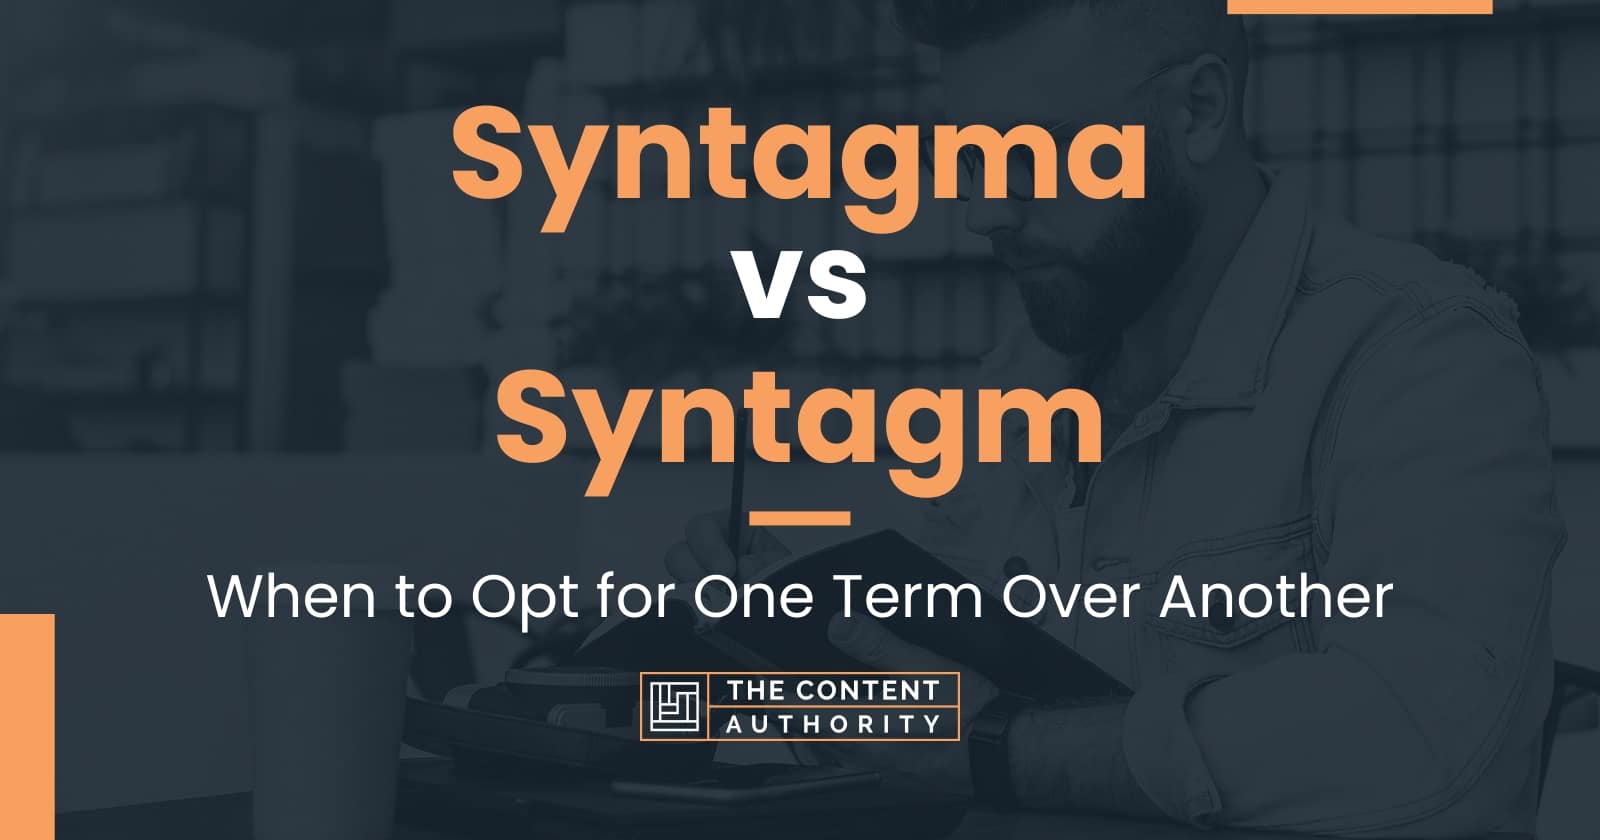 Syntagma vs Syntagm: When to Opt for One Term Over Another